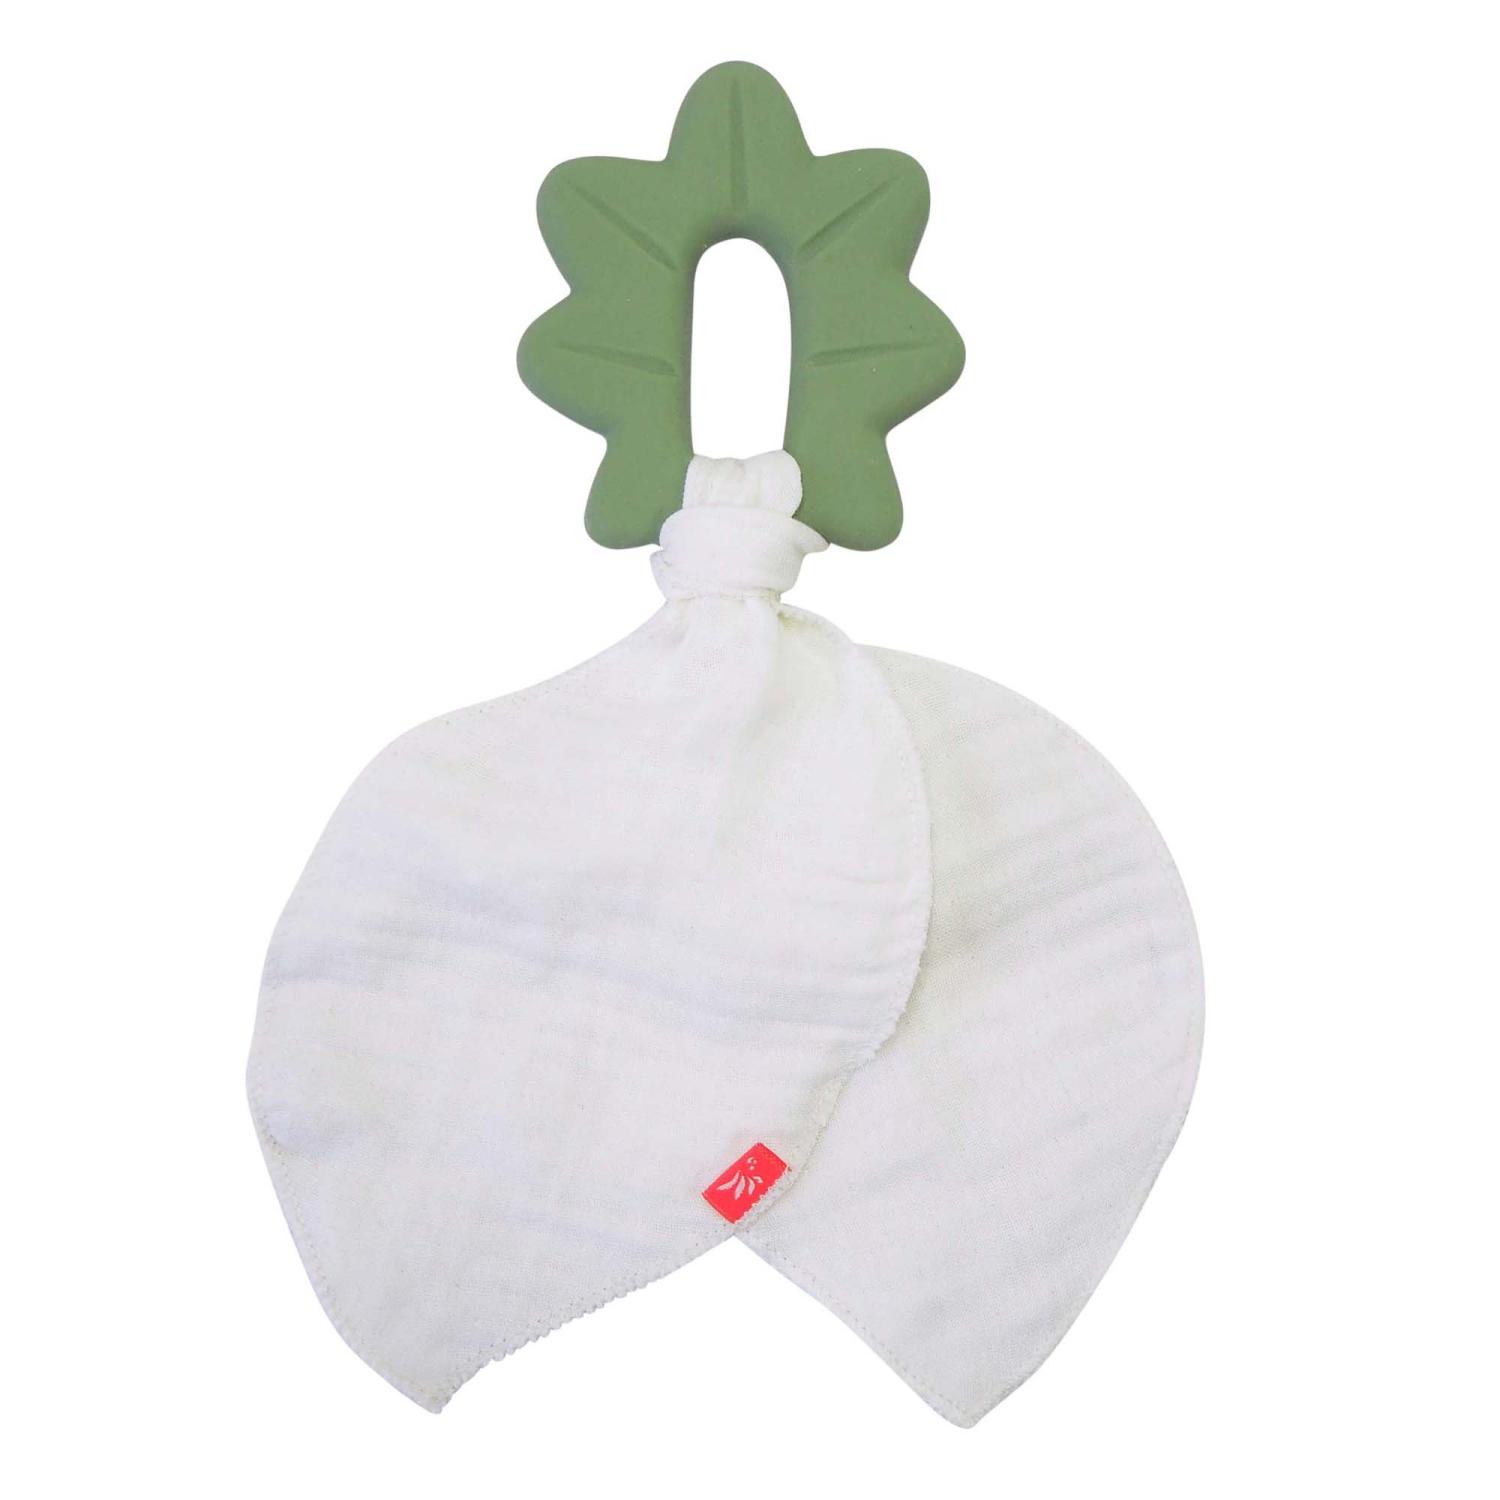 Rubber Leaf with Towel